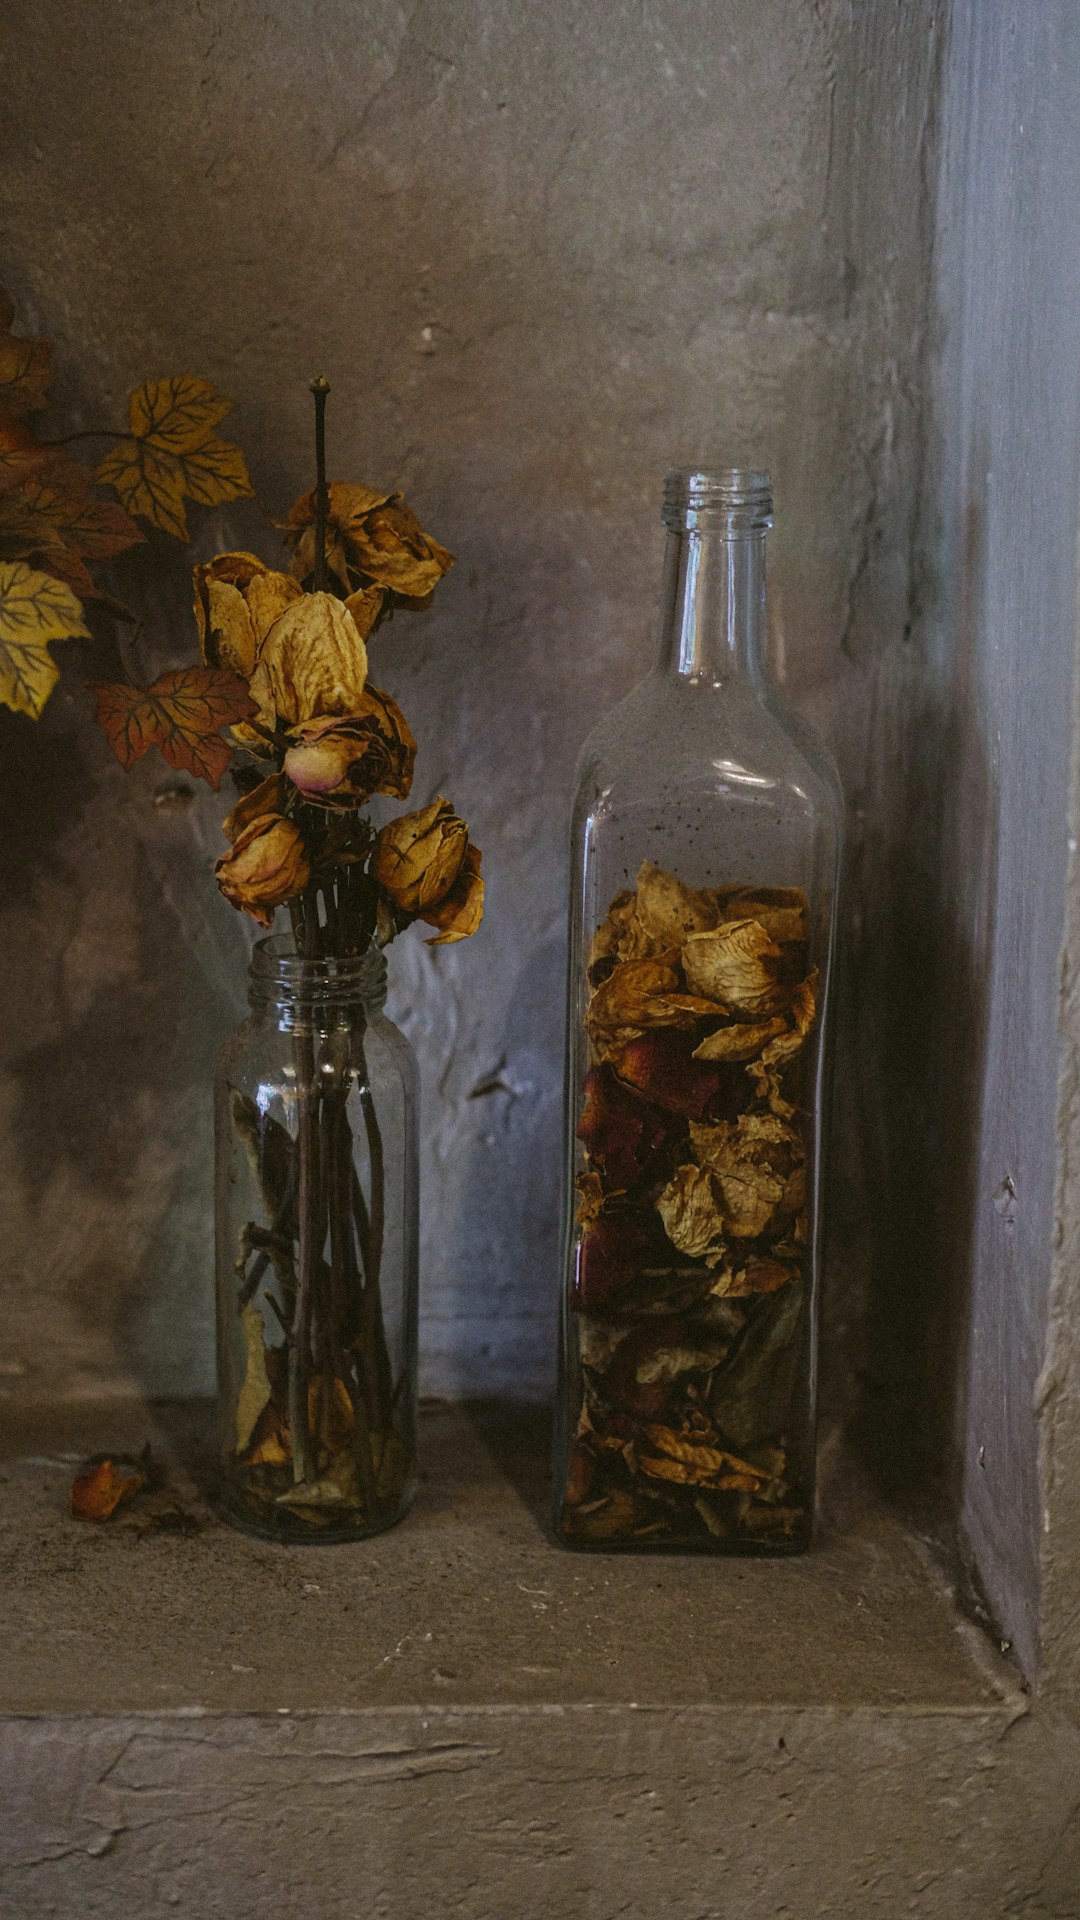 brown and yellow flower in glass bottle